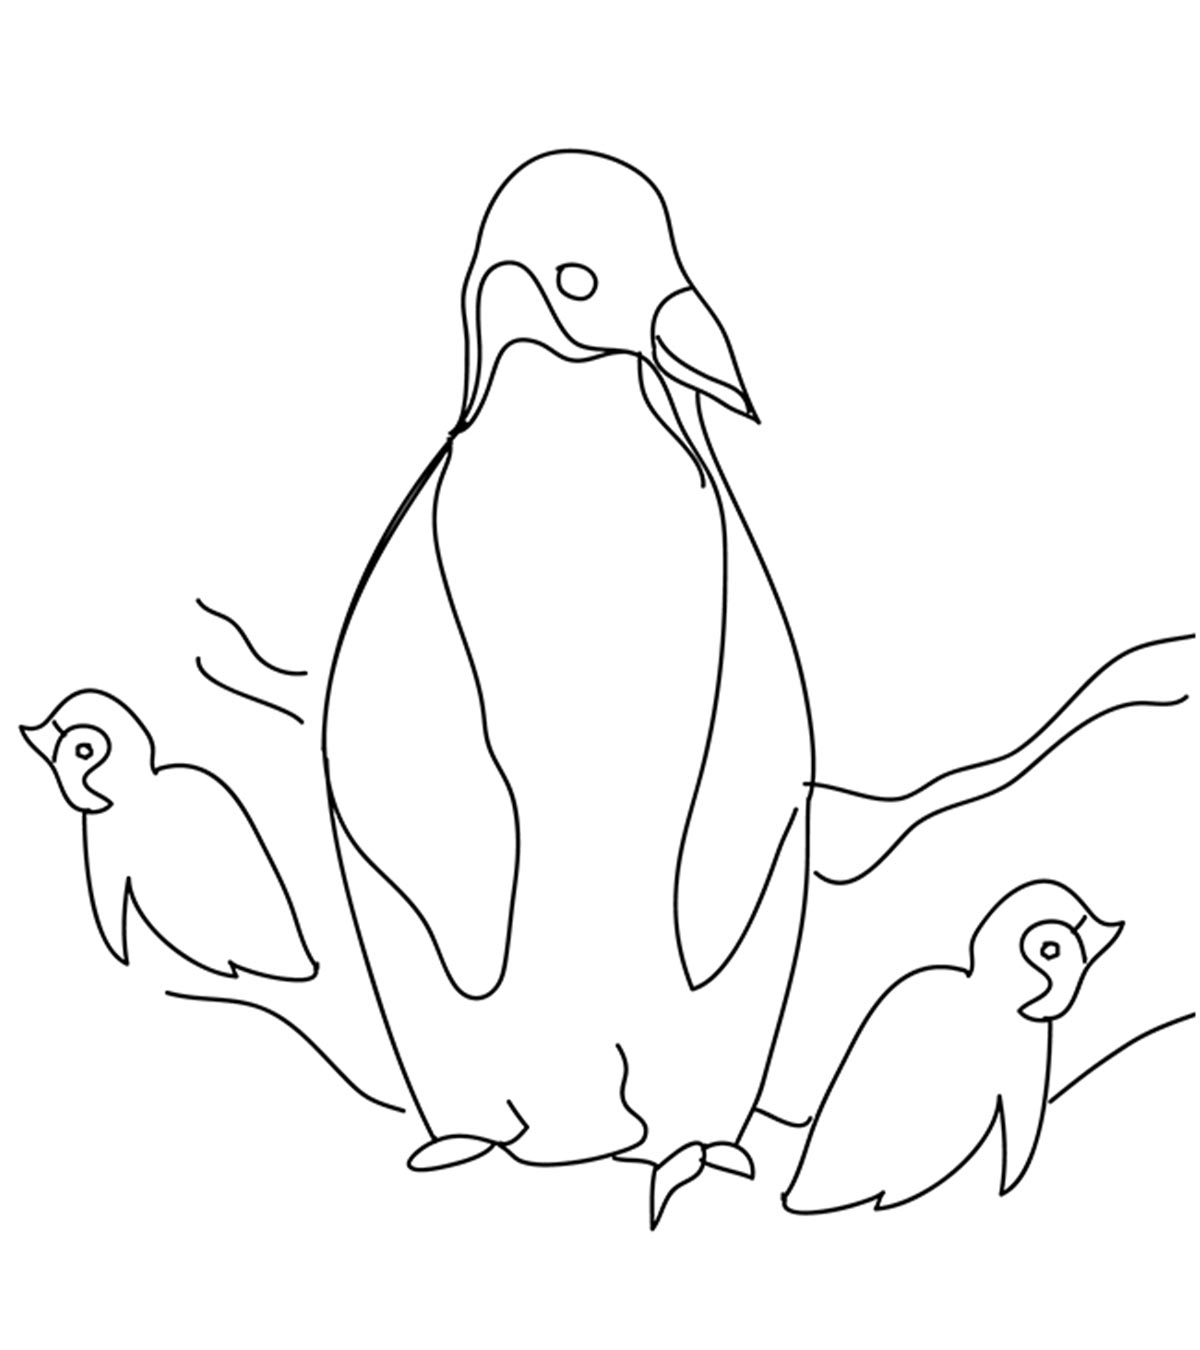 Top 20 Penguin Coloring Pages For Your Little Ones_image